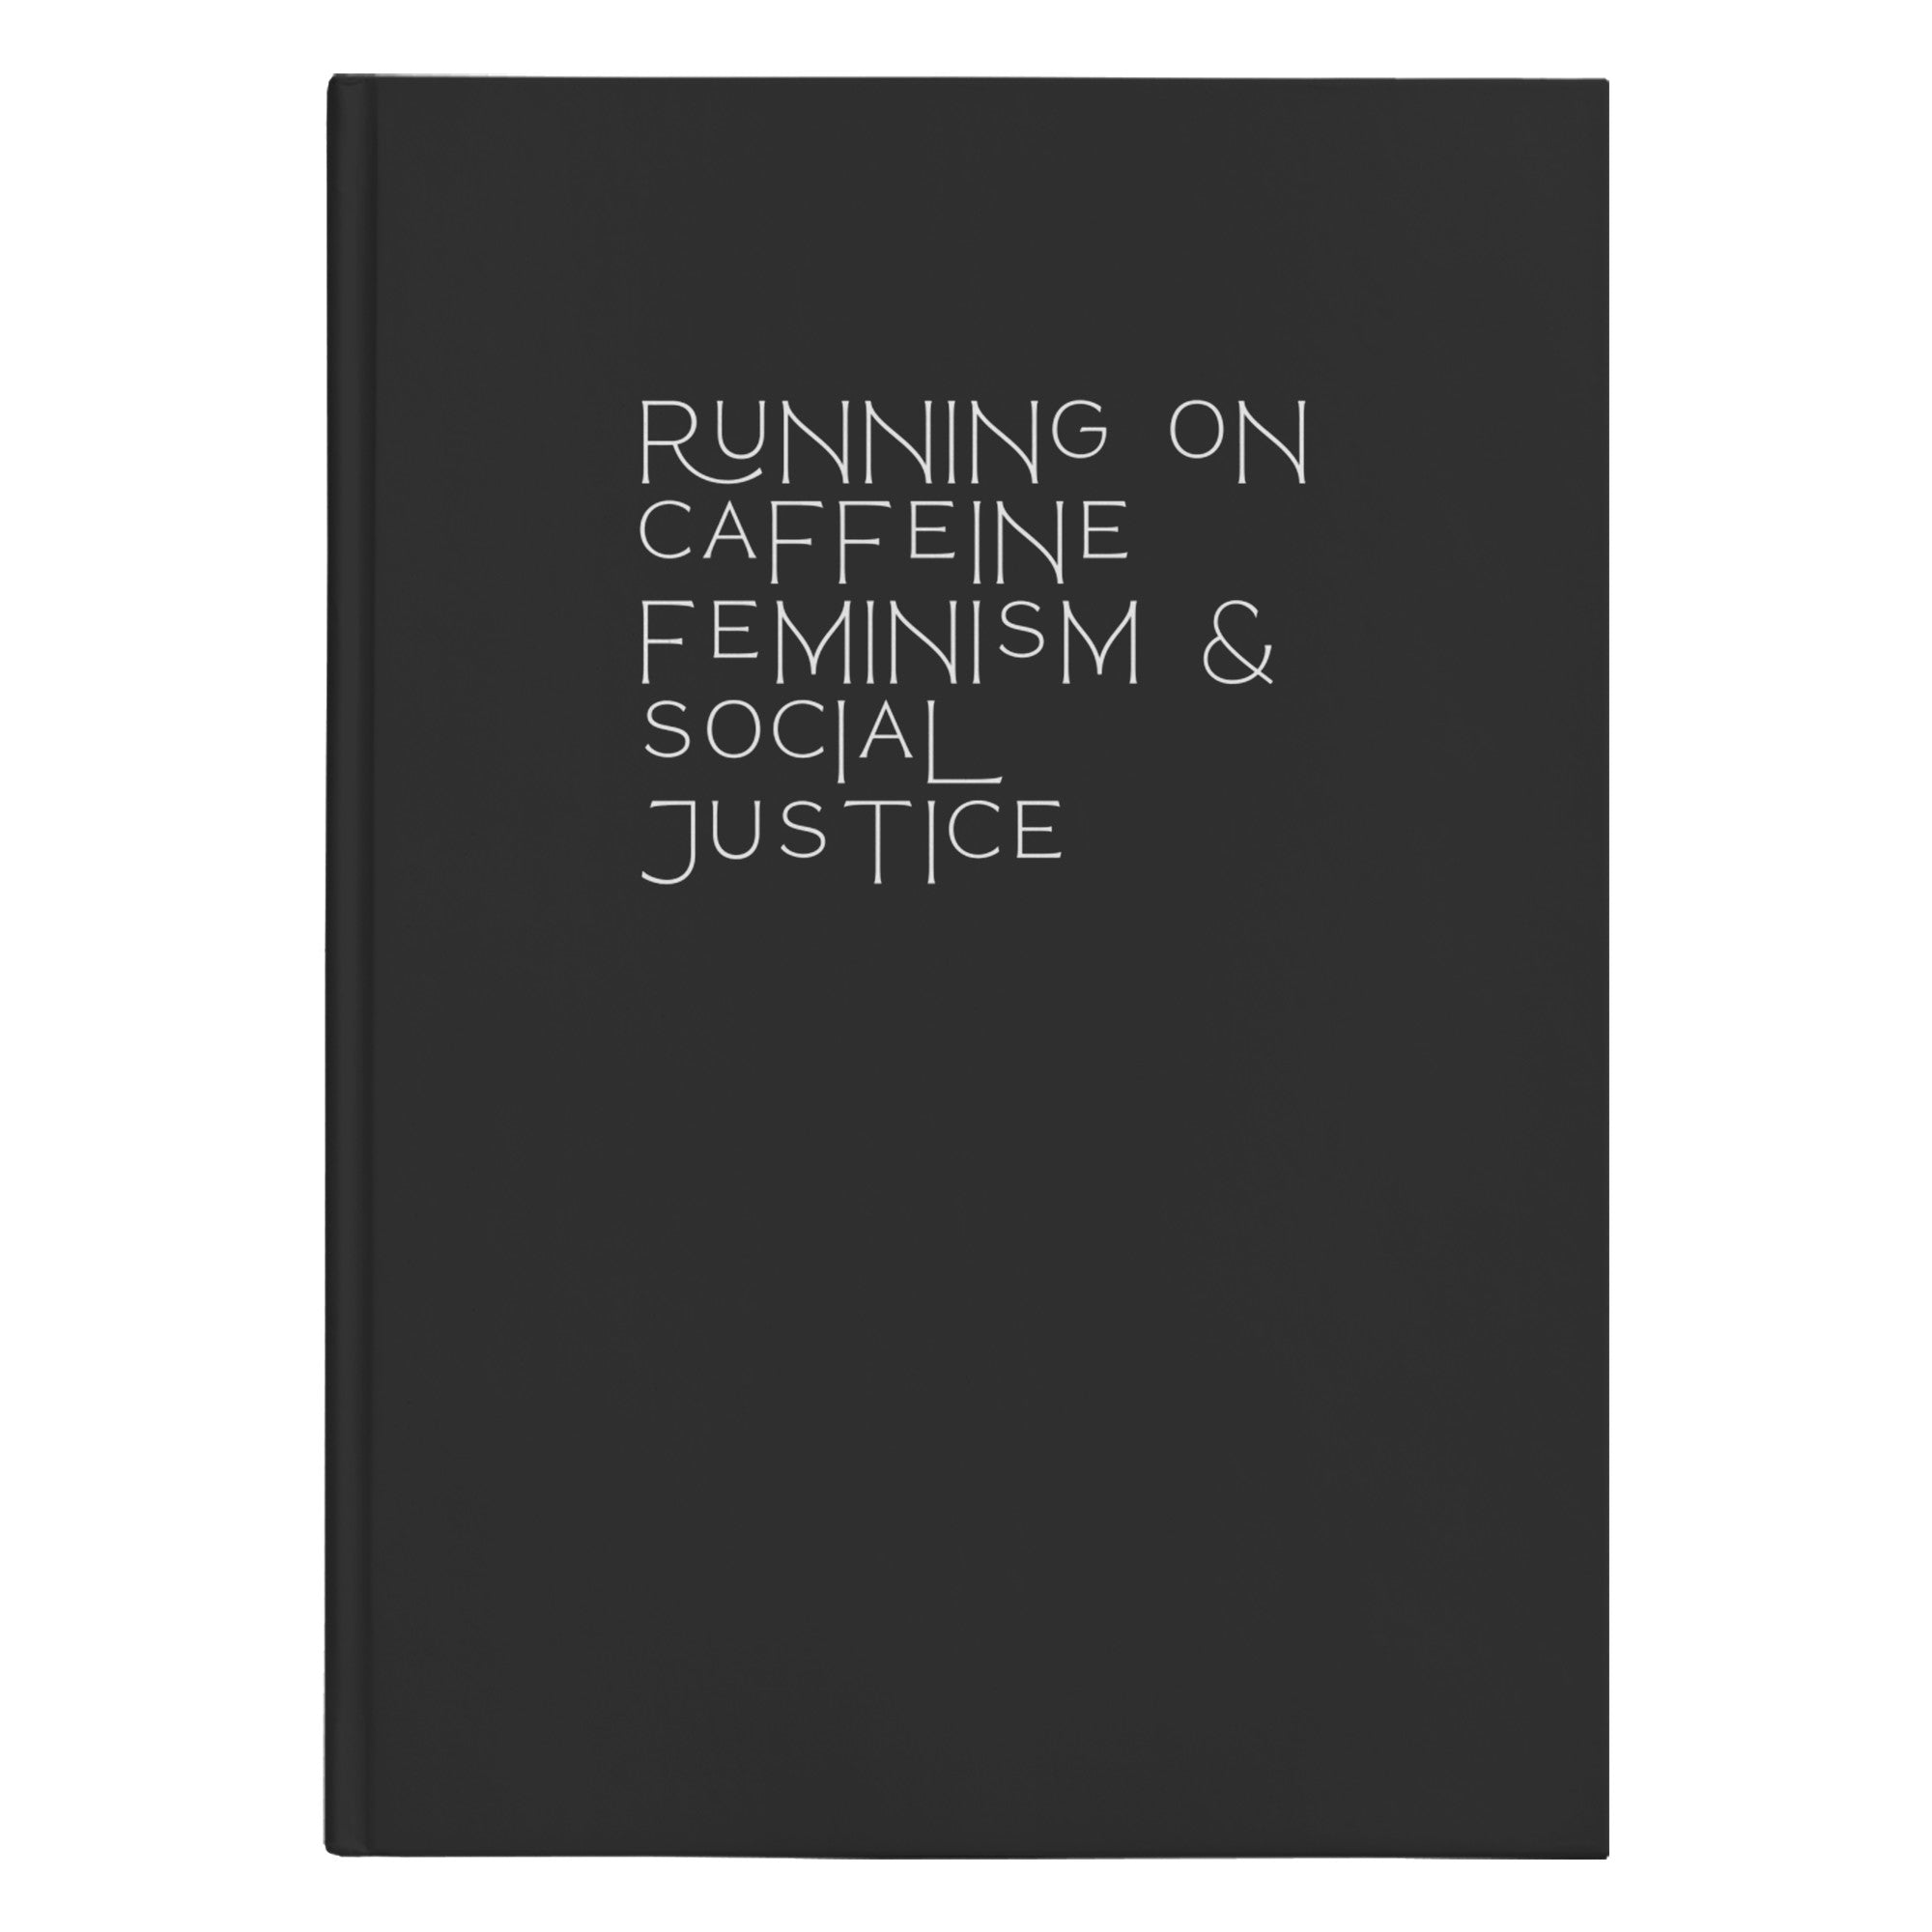 Caffeine Feminism & Social Justice Hardcover Notebook & Journal - The Kindness Cause